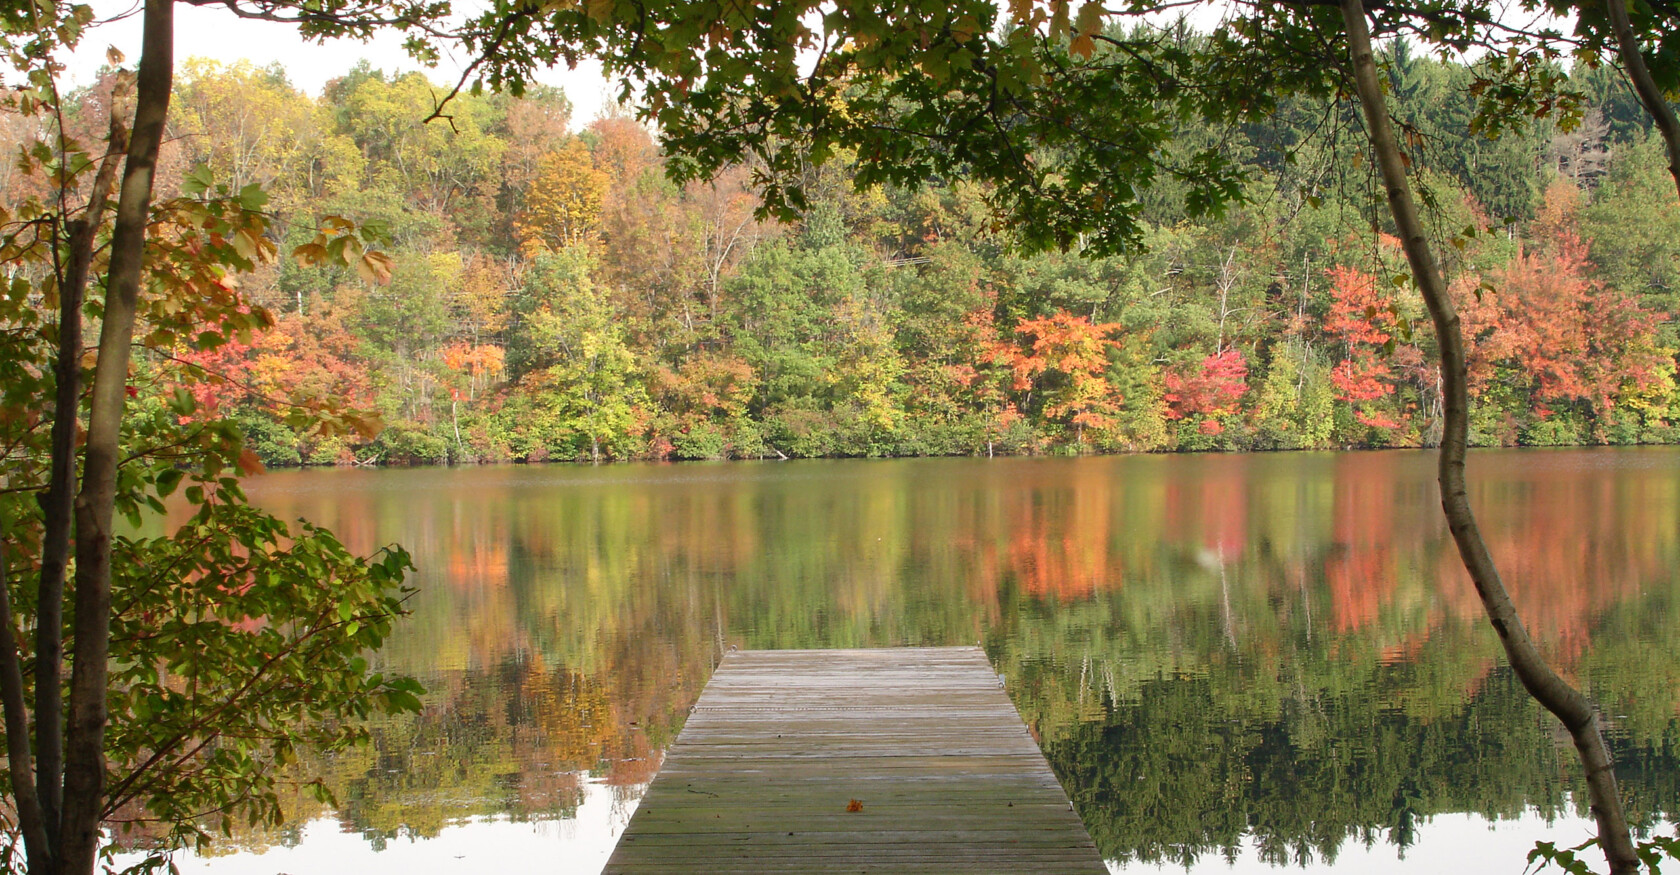 View of lake and wooden dock.